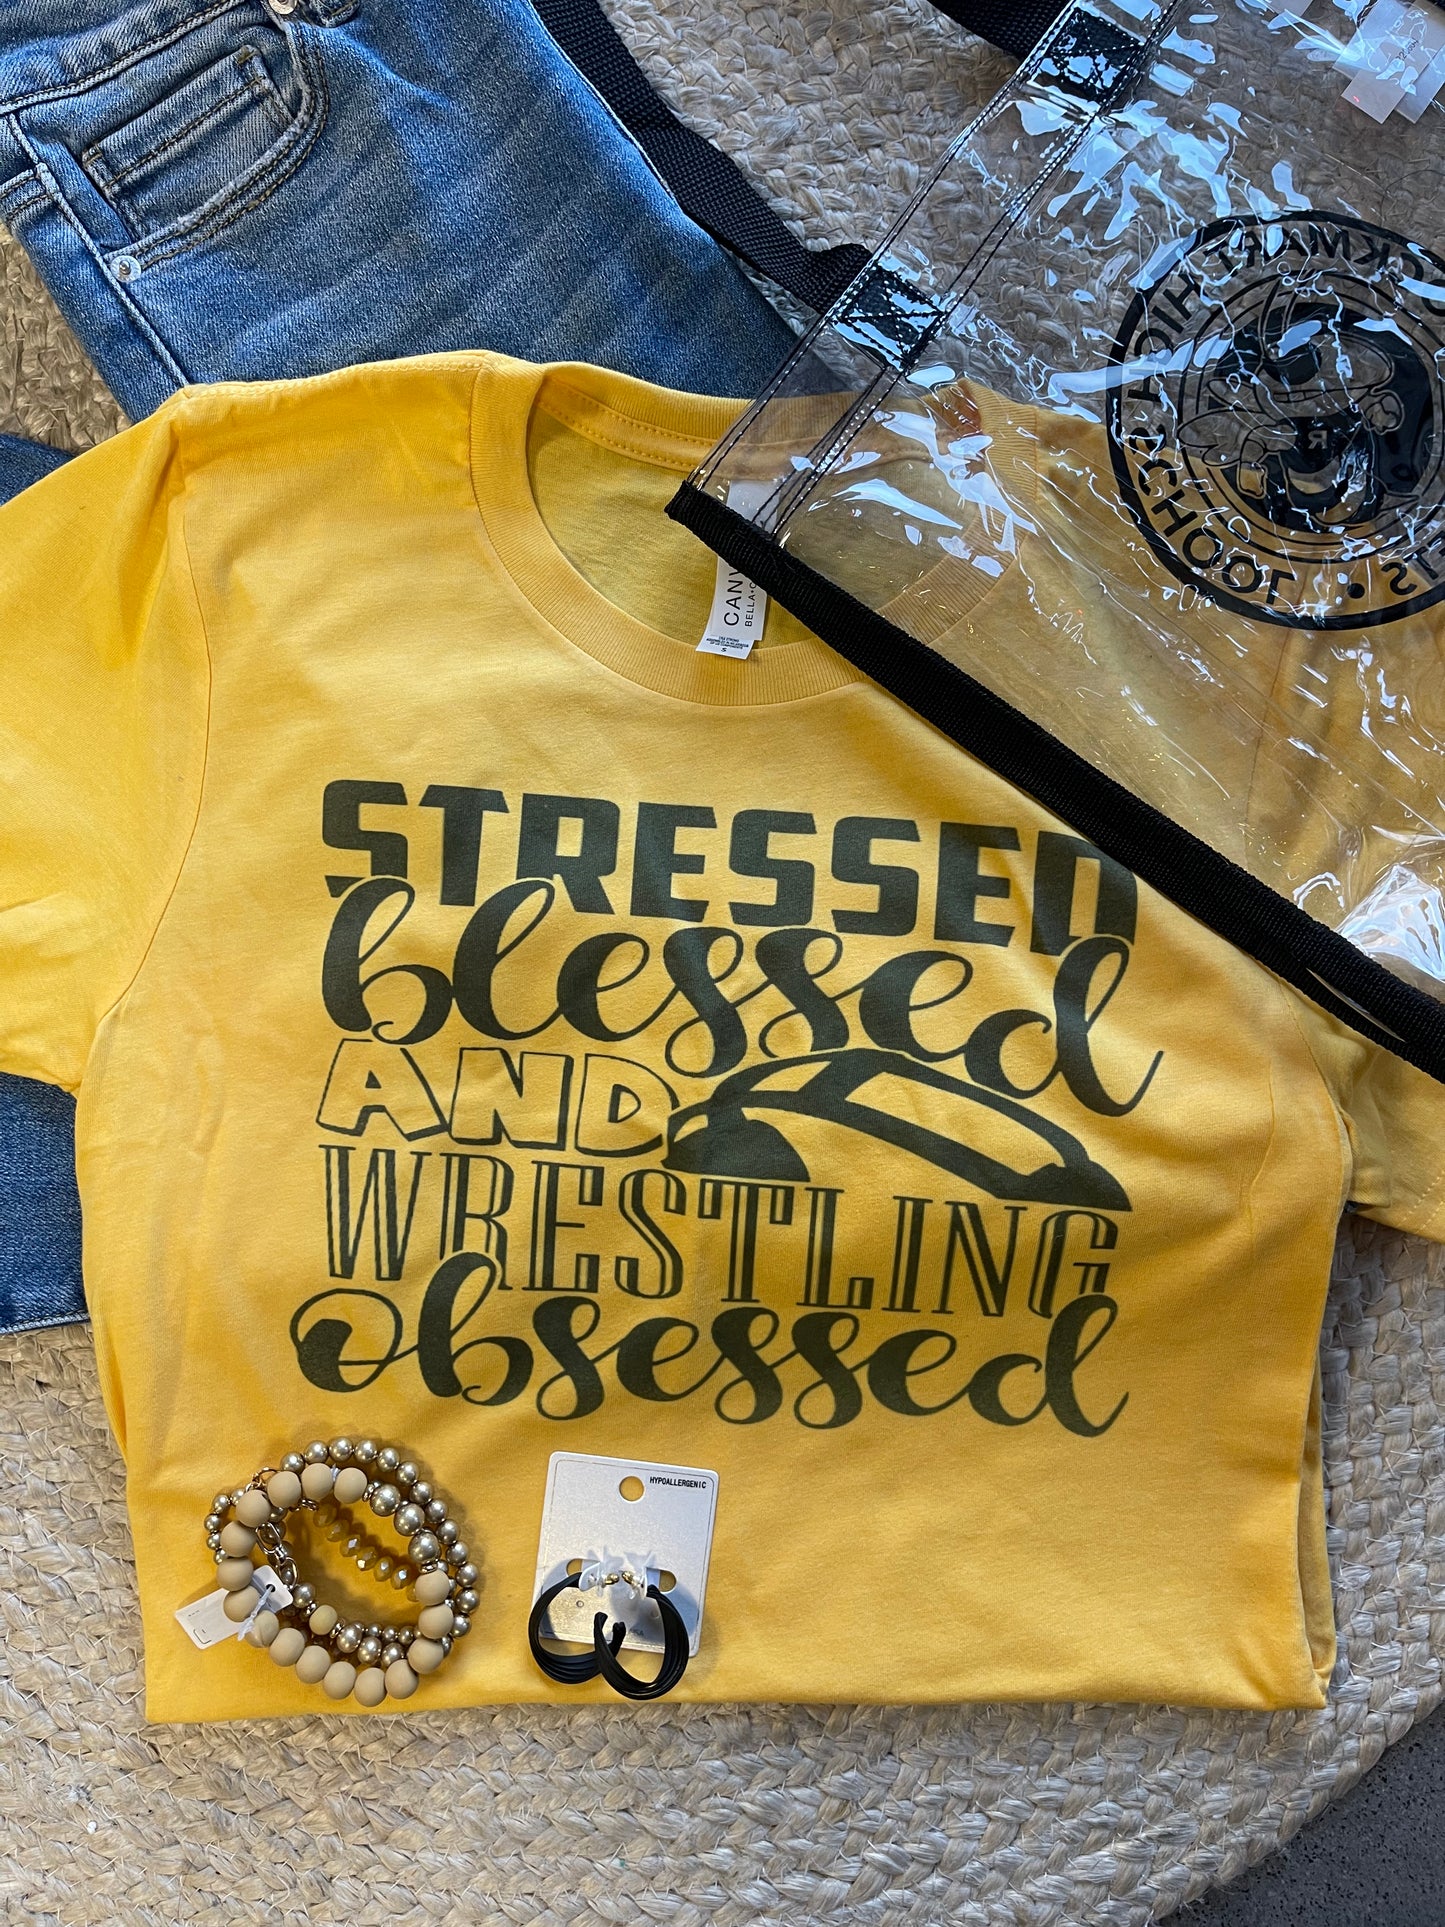 SALE! Wrestling Obsessed Tee (S-XL)